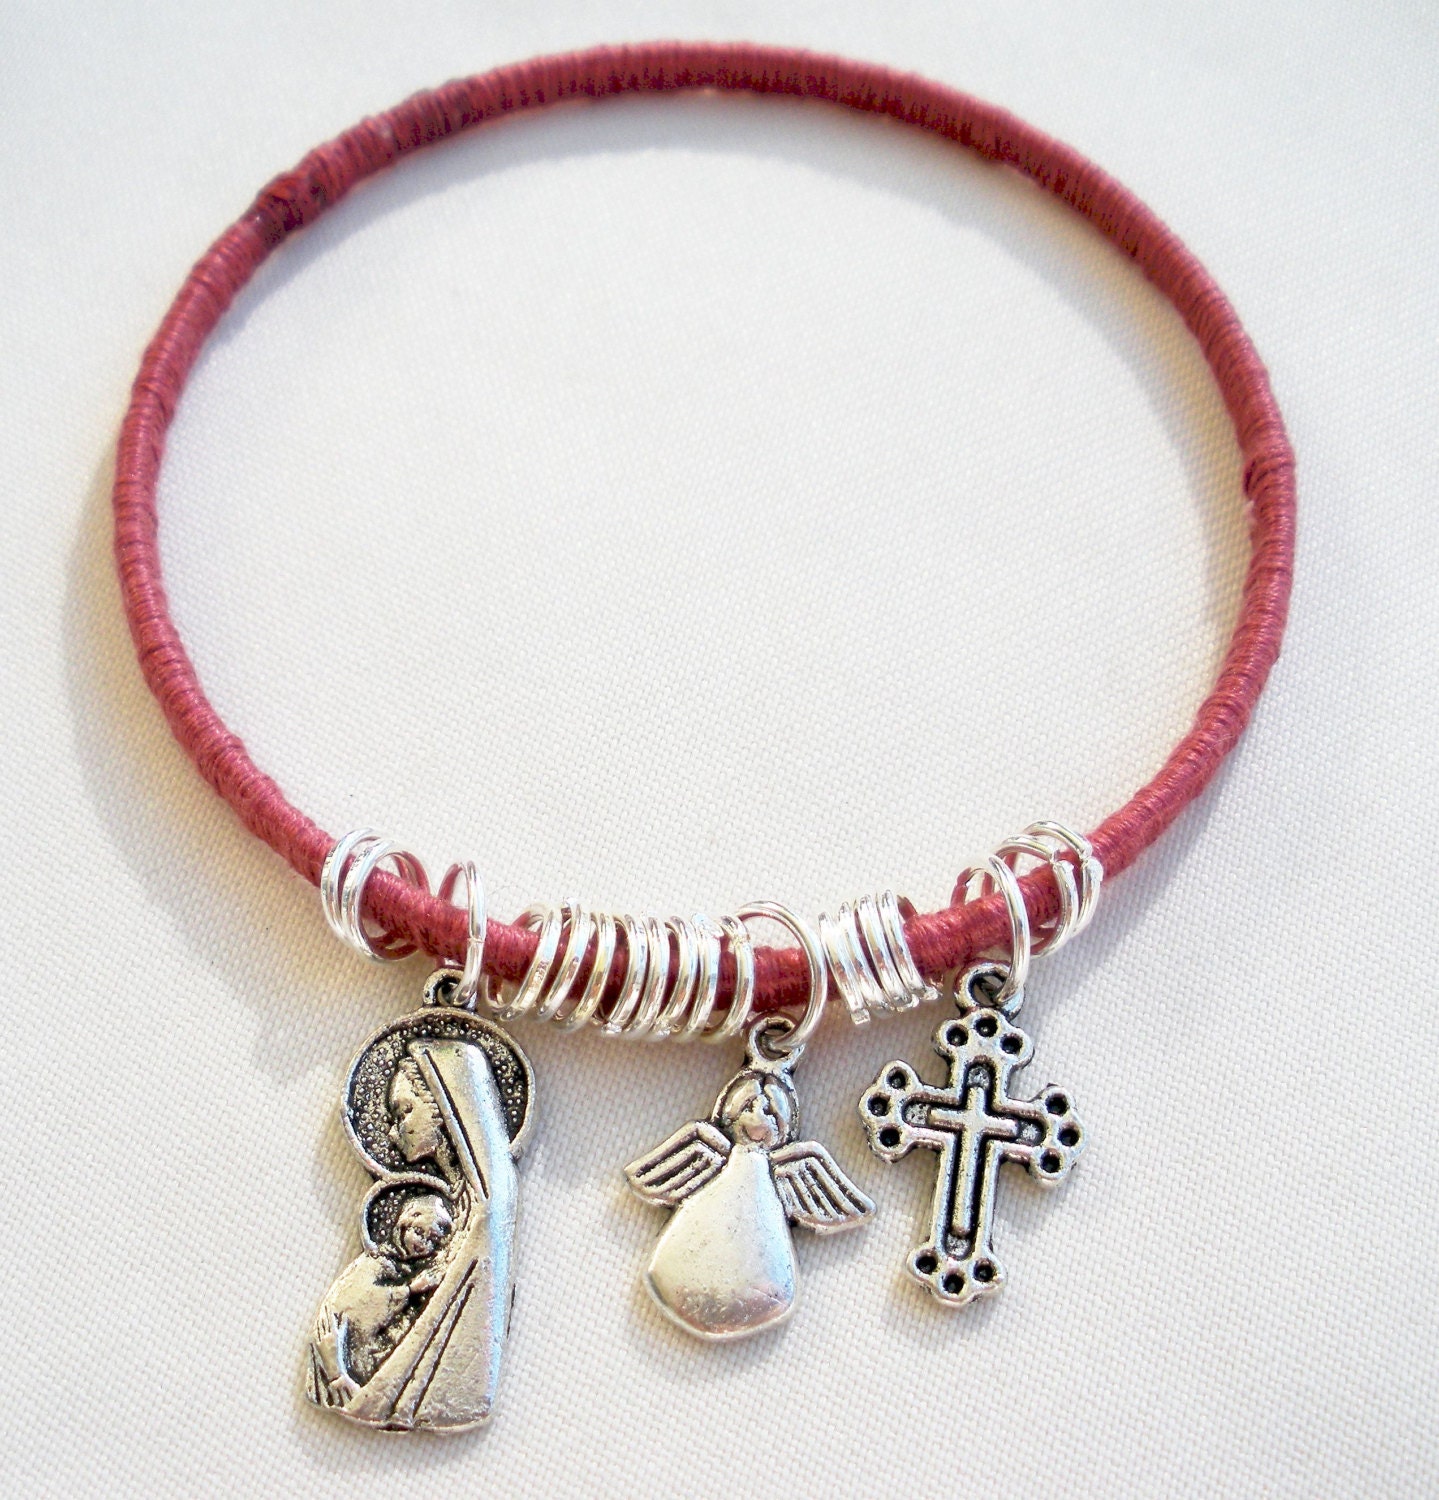 Wrapped pink thread Bangle with mary angel and by TopsailWinds